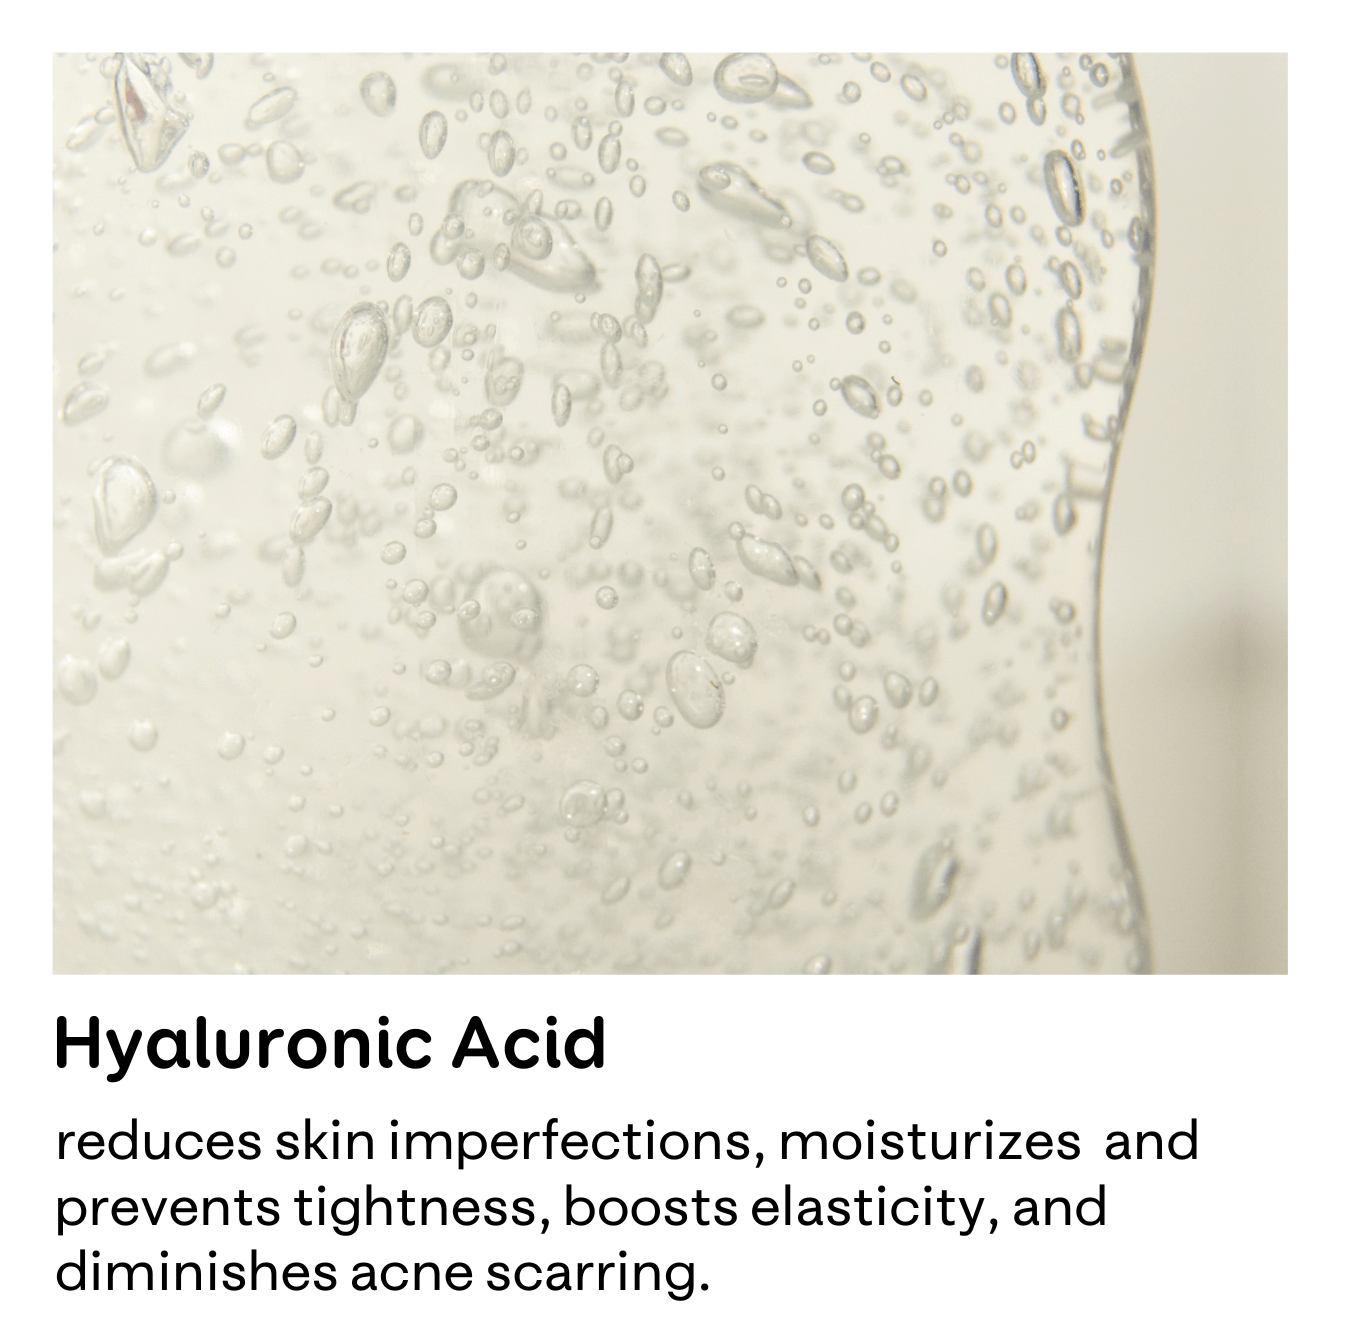 An image of Hyaluronic Acid with information about the benefits it has for skincare purposes.